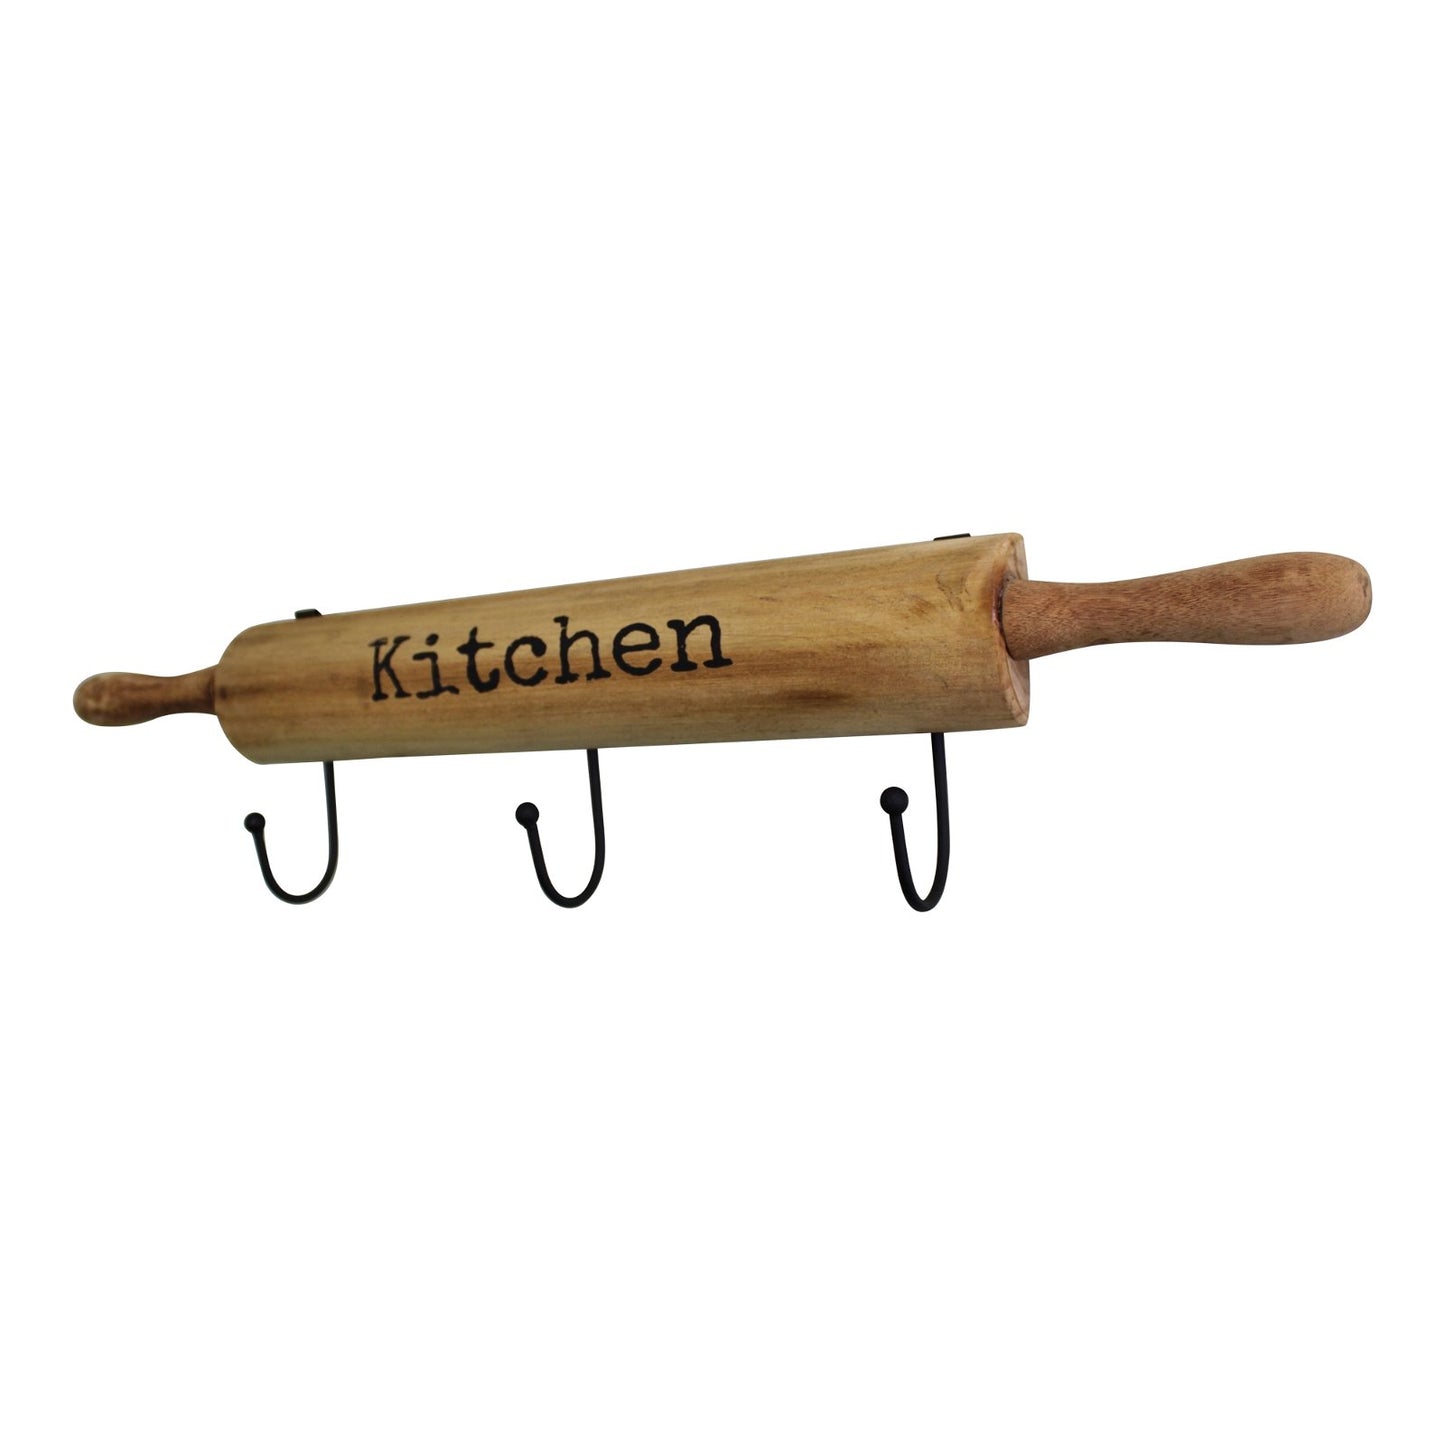 Kitchen Wall Hooks, 4 Hooks with a Rolling Pin Design